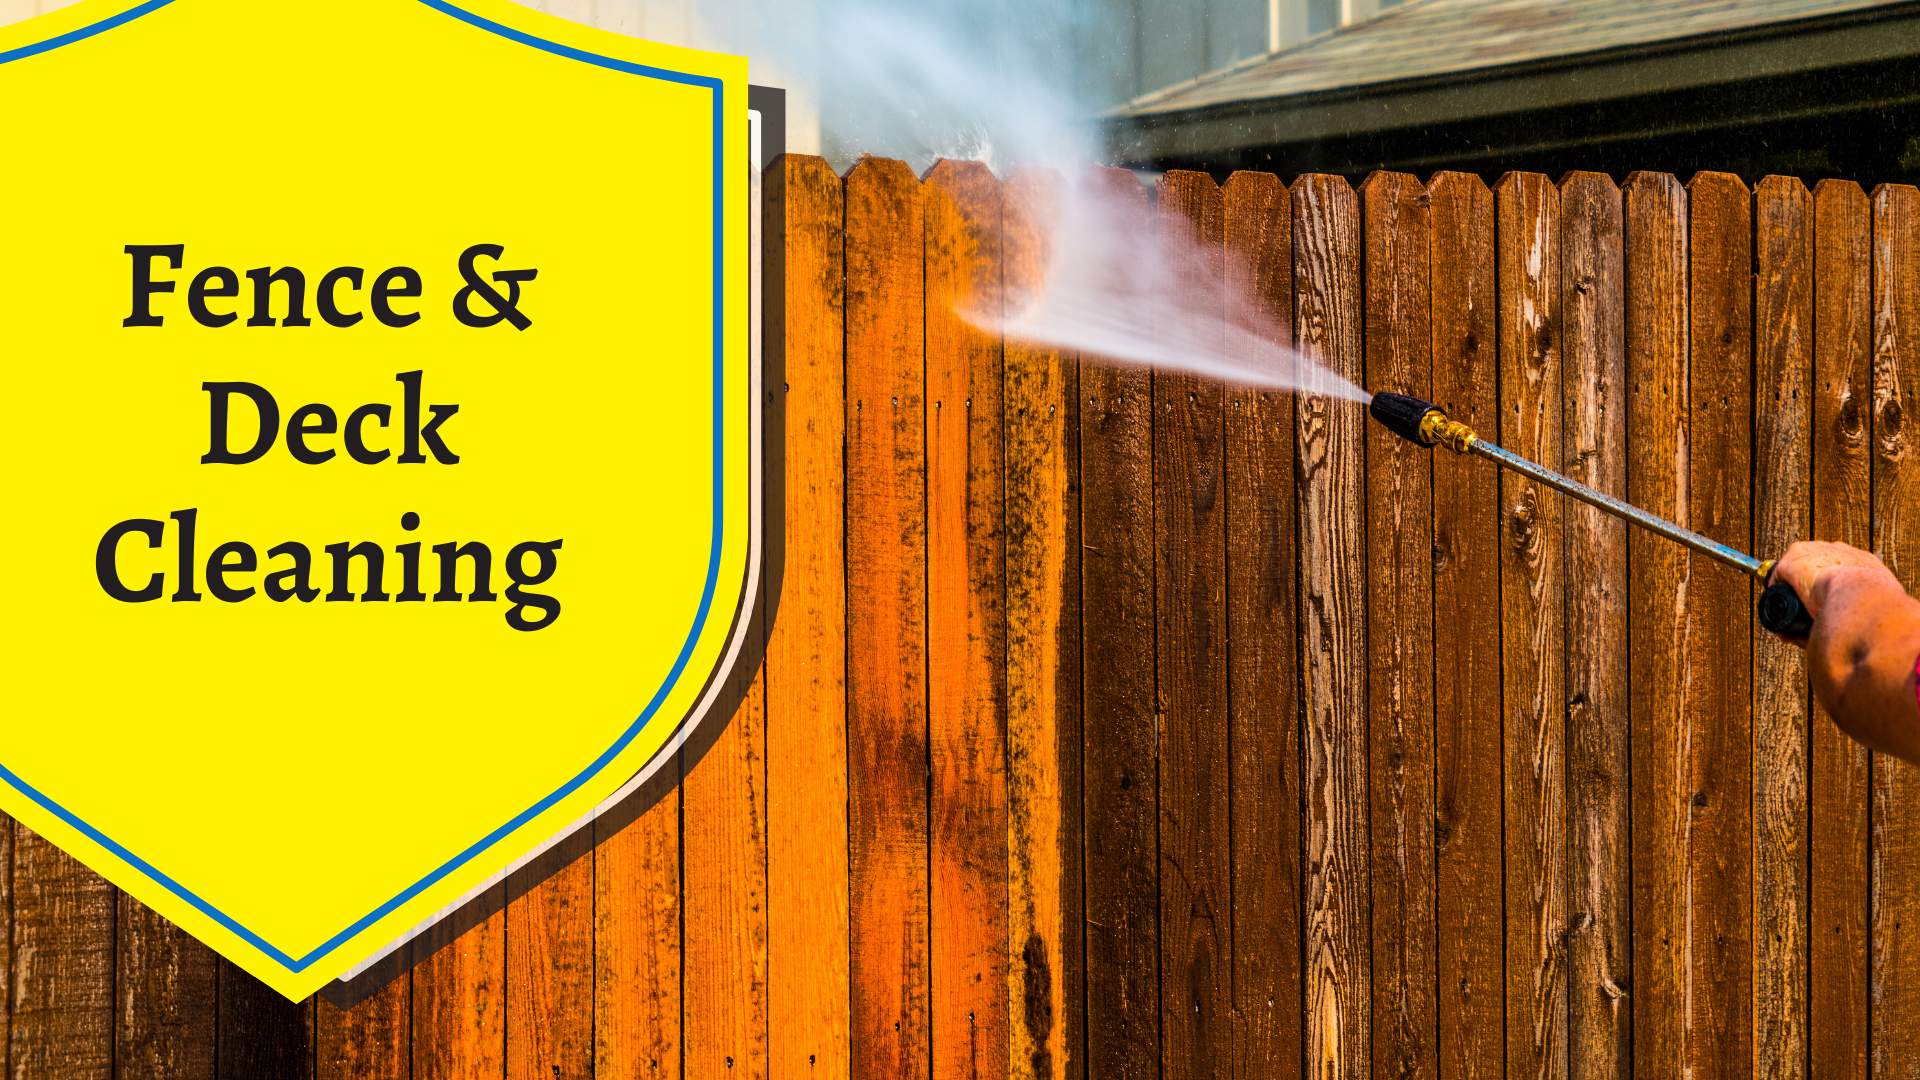 Fence & deck cleaning